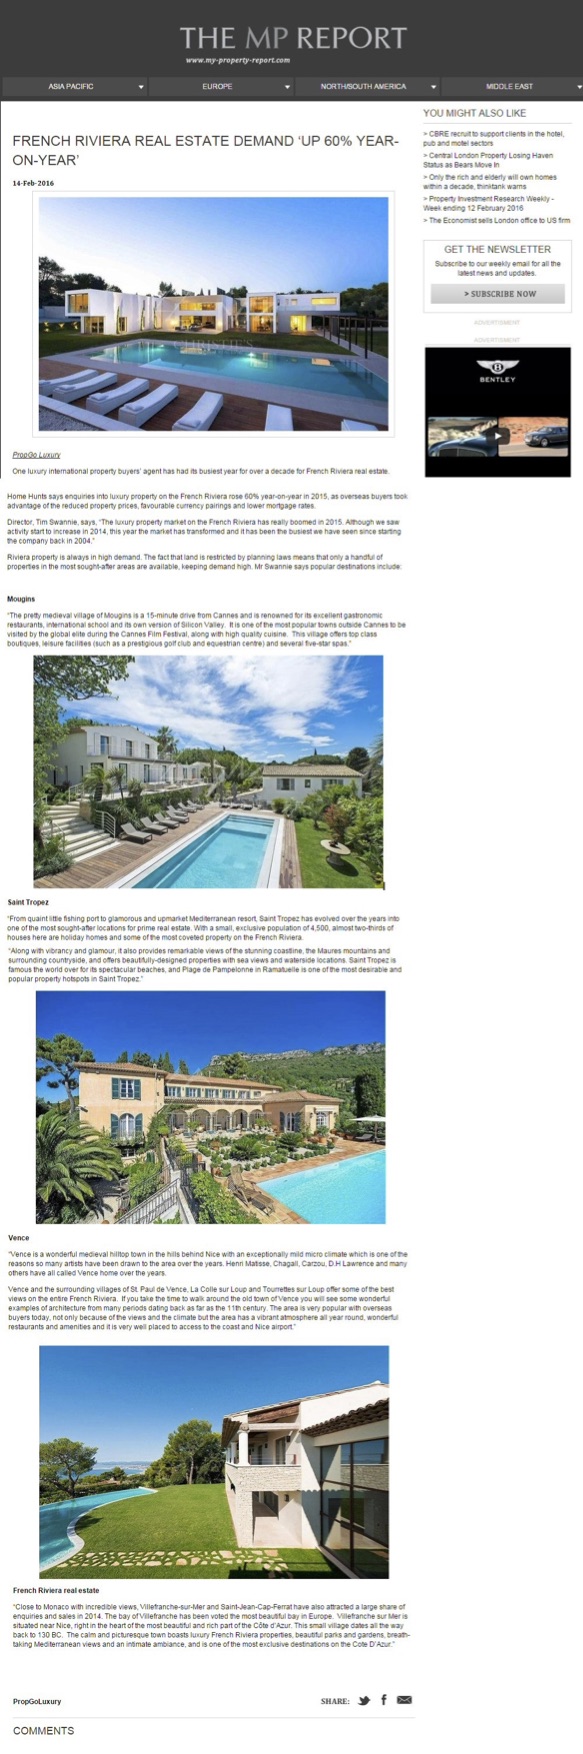 PropGO Luxury – French Riviera Real Estate interest increases